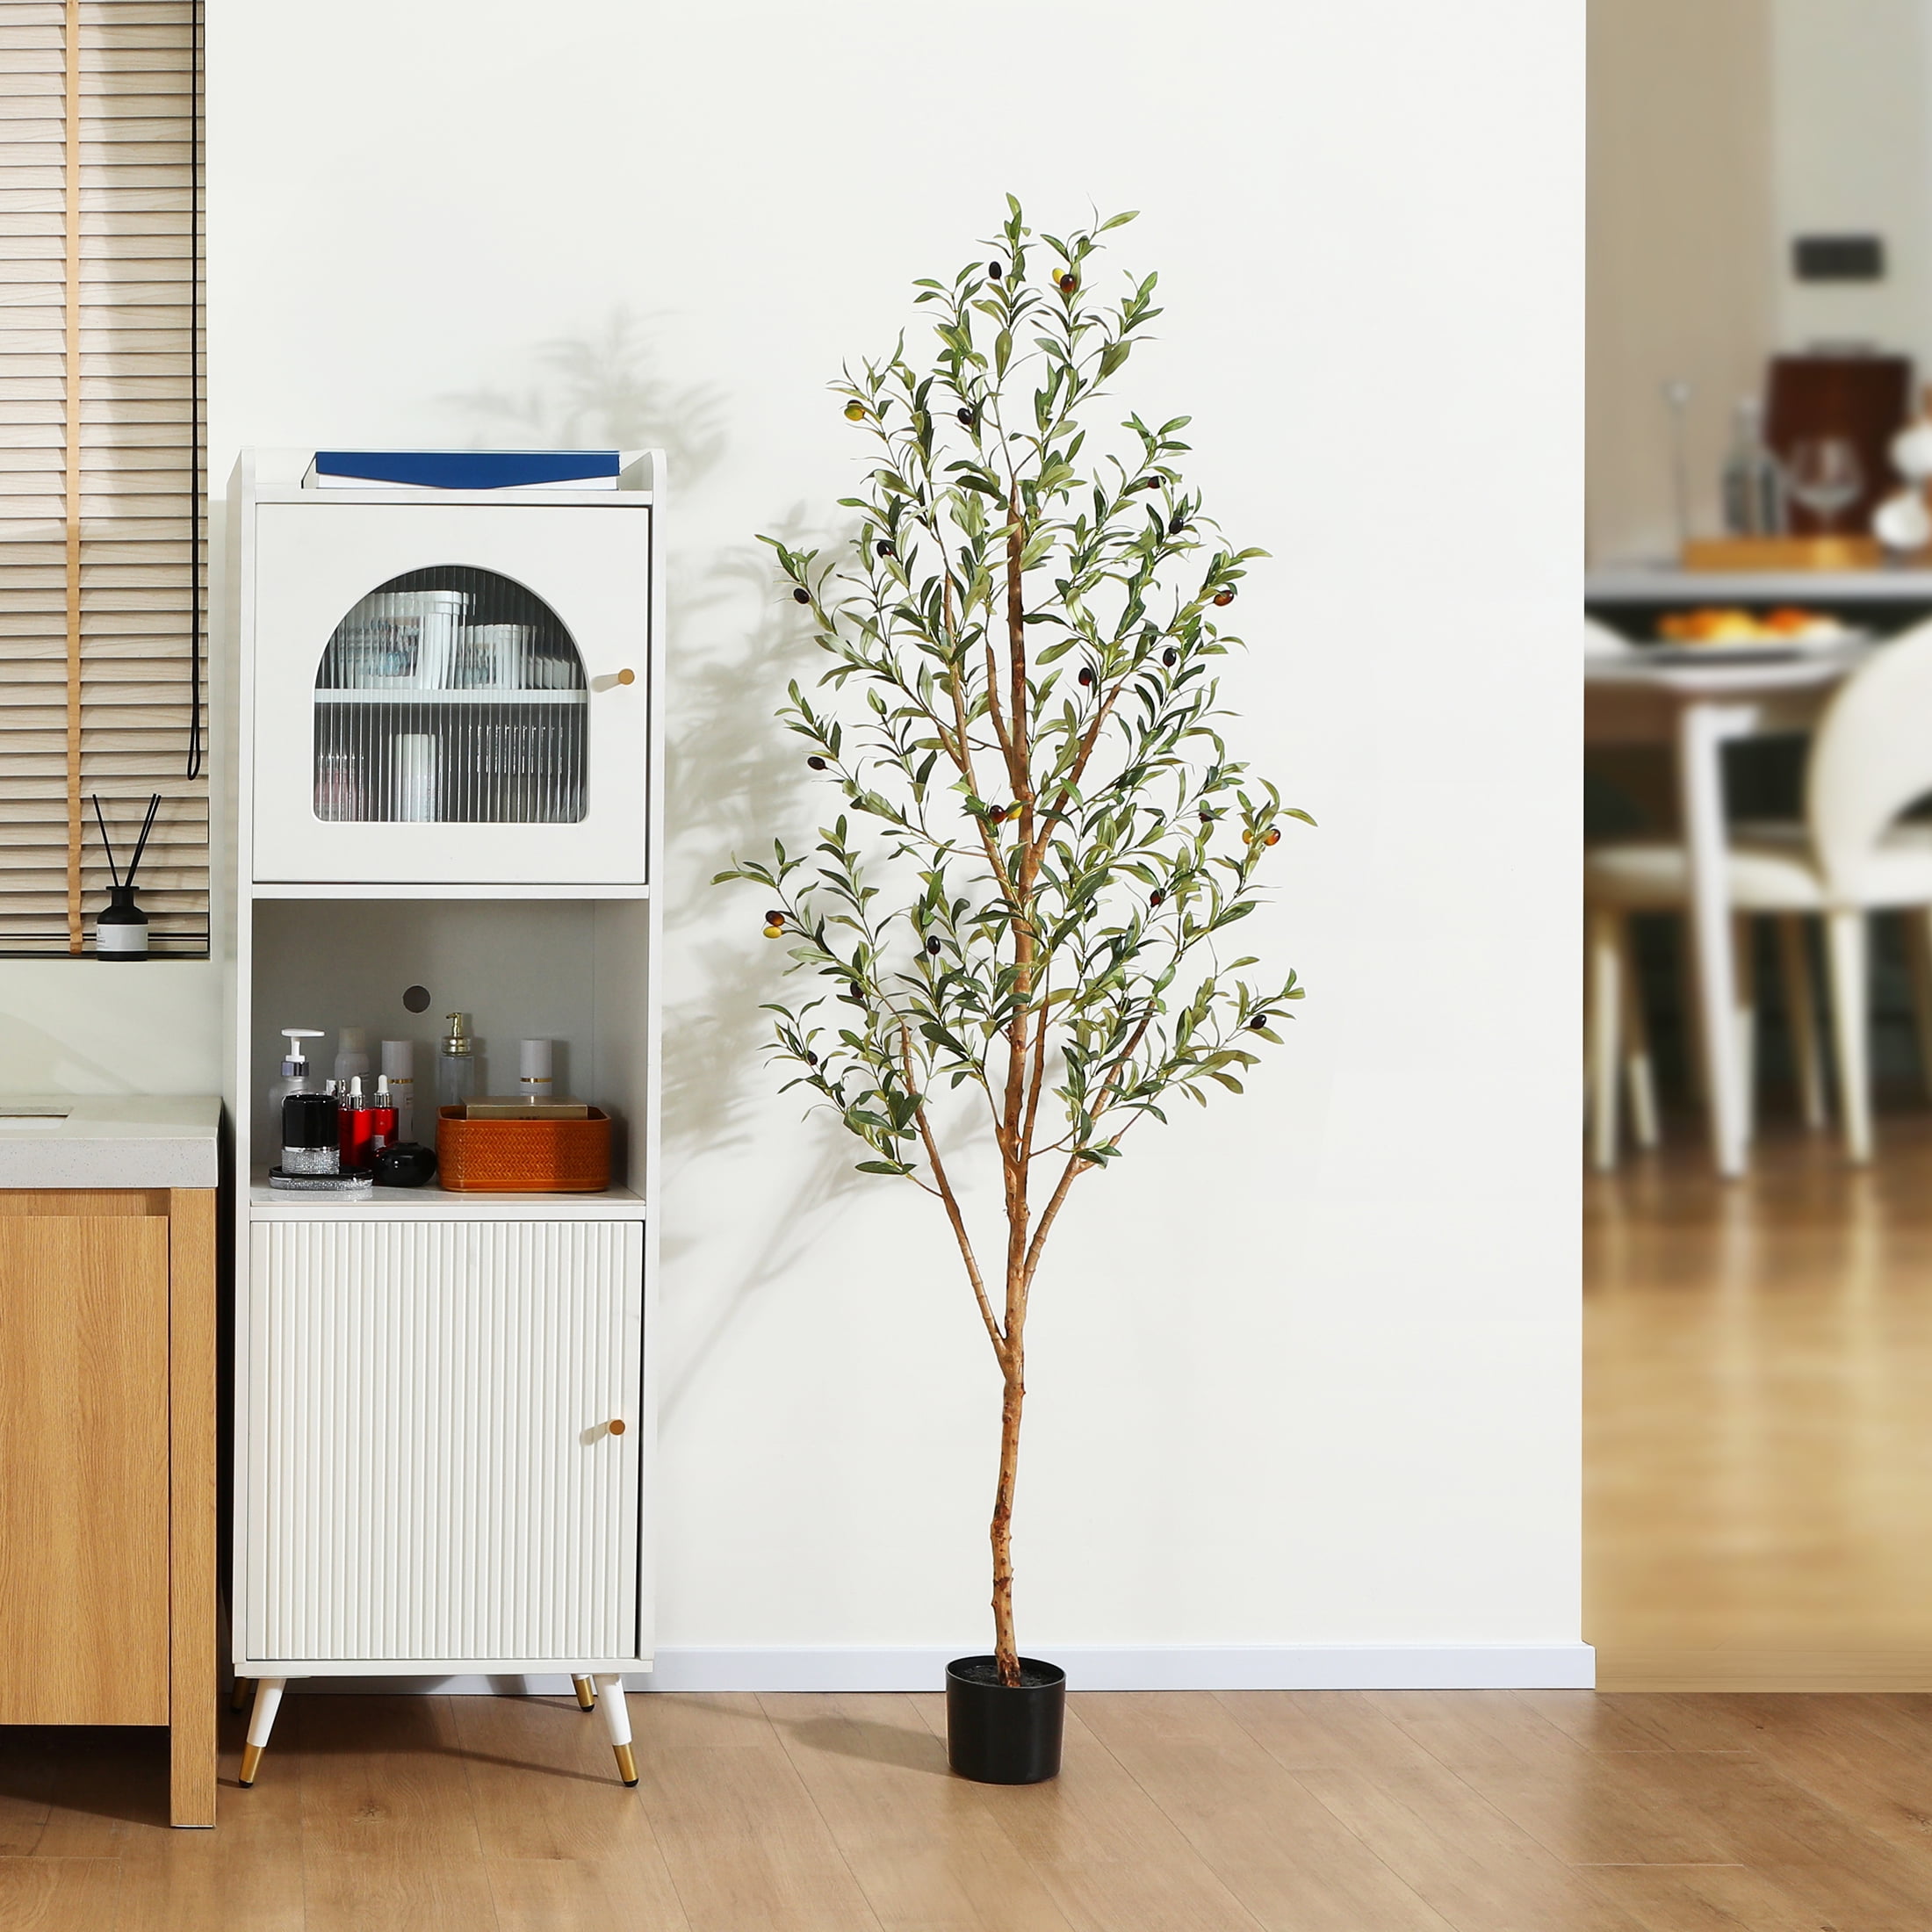  Hobyhoon Artificial Olive Tree, 6FT Tall Faux Silk Plant  Artificial Tree in Potted Oliver Branch Leaves and Fruits for Modern Home  Decor Indoor : Home & Kitchen